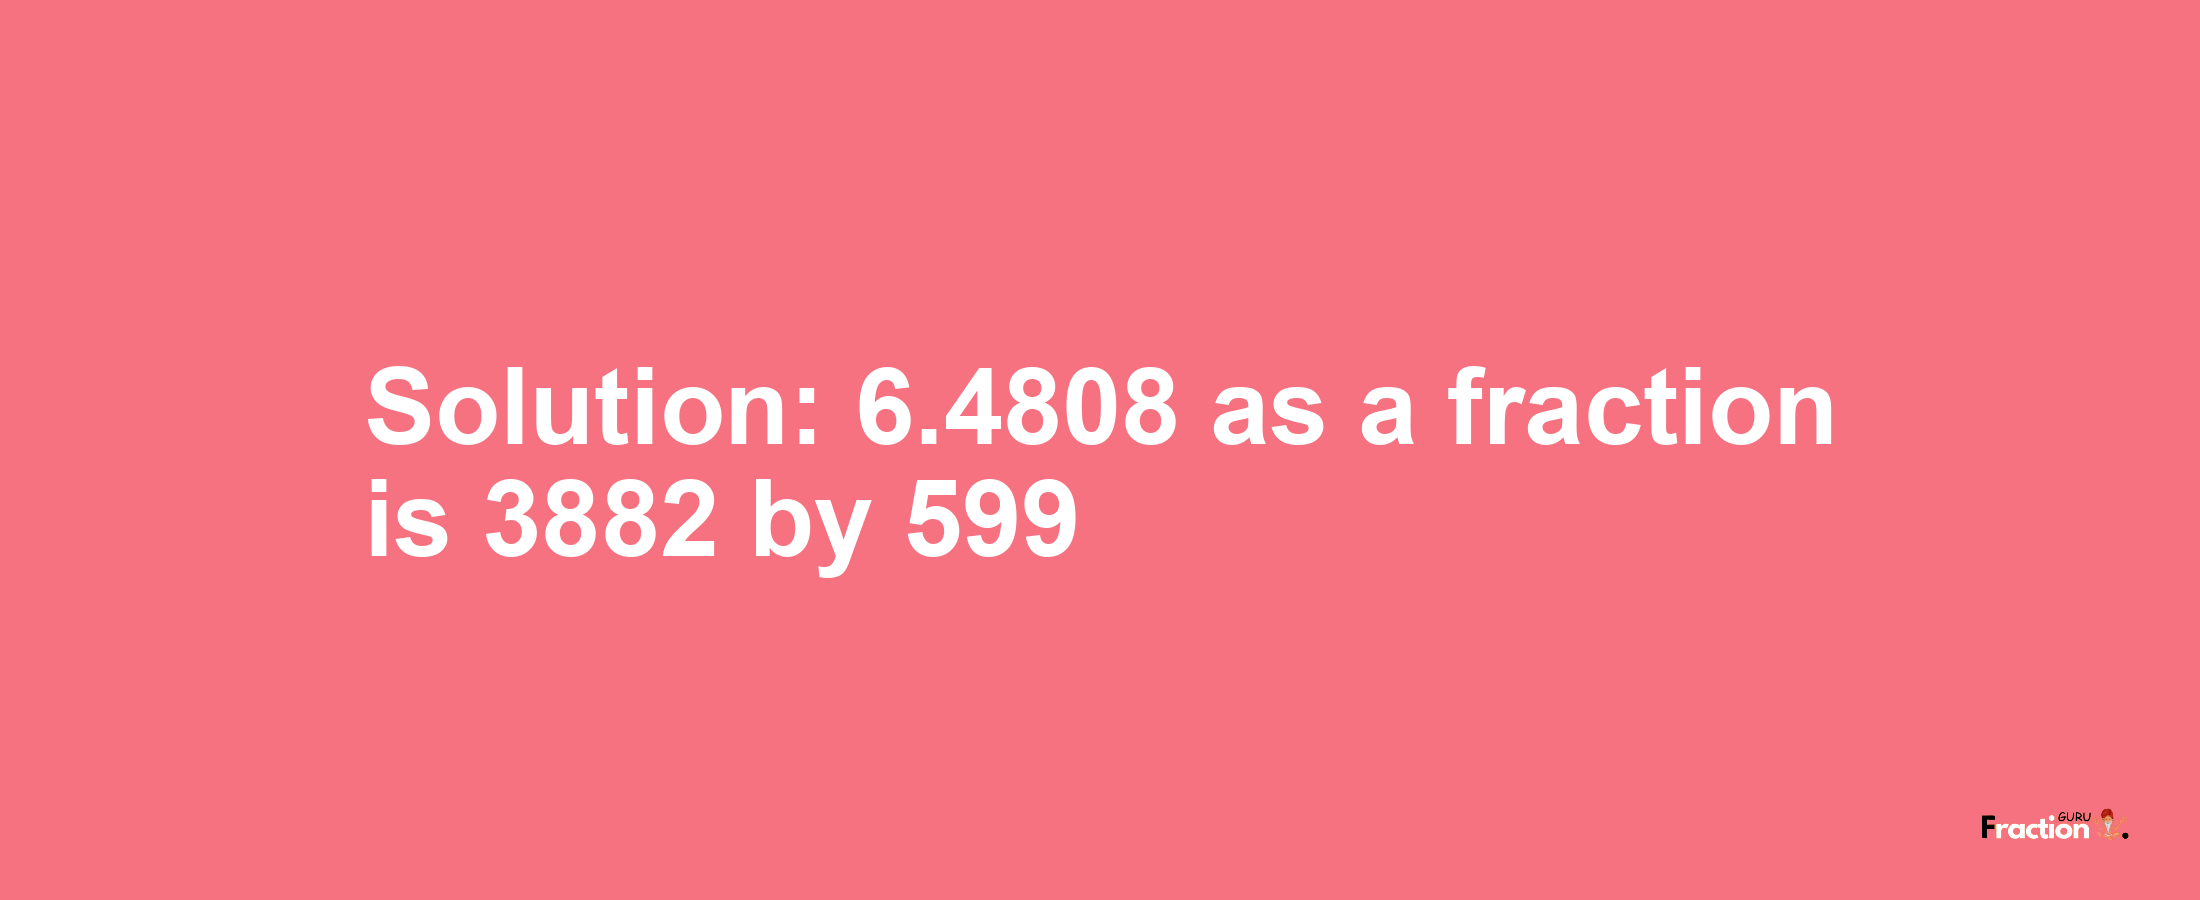 Solution:6.4808 as a fraction is 3882/599